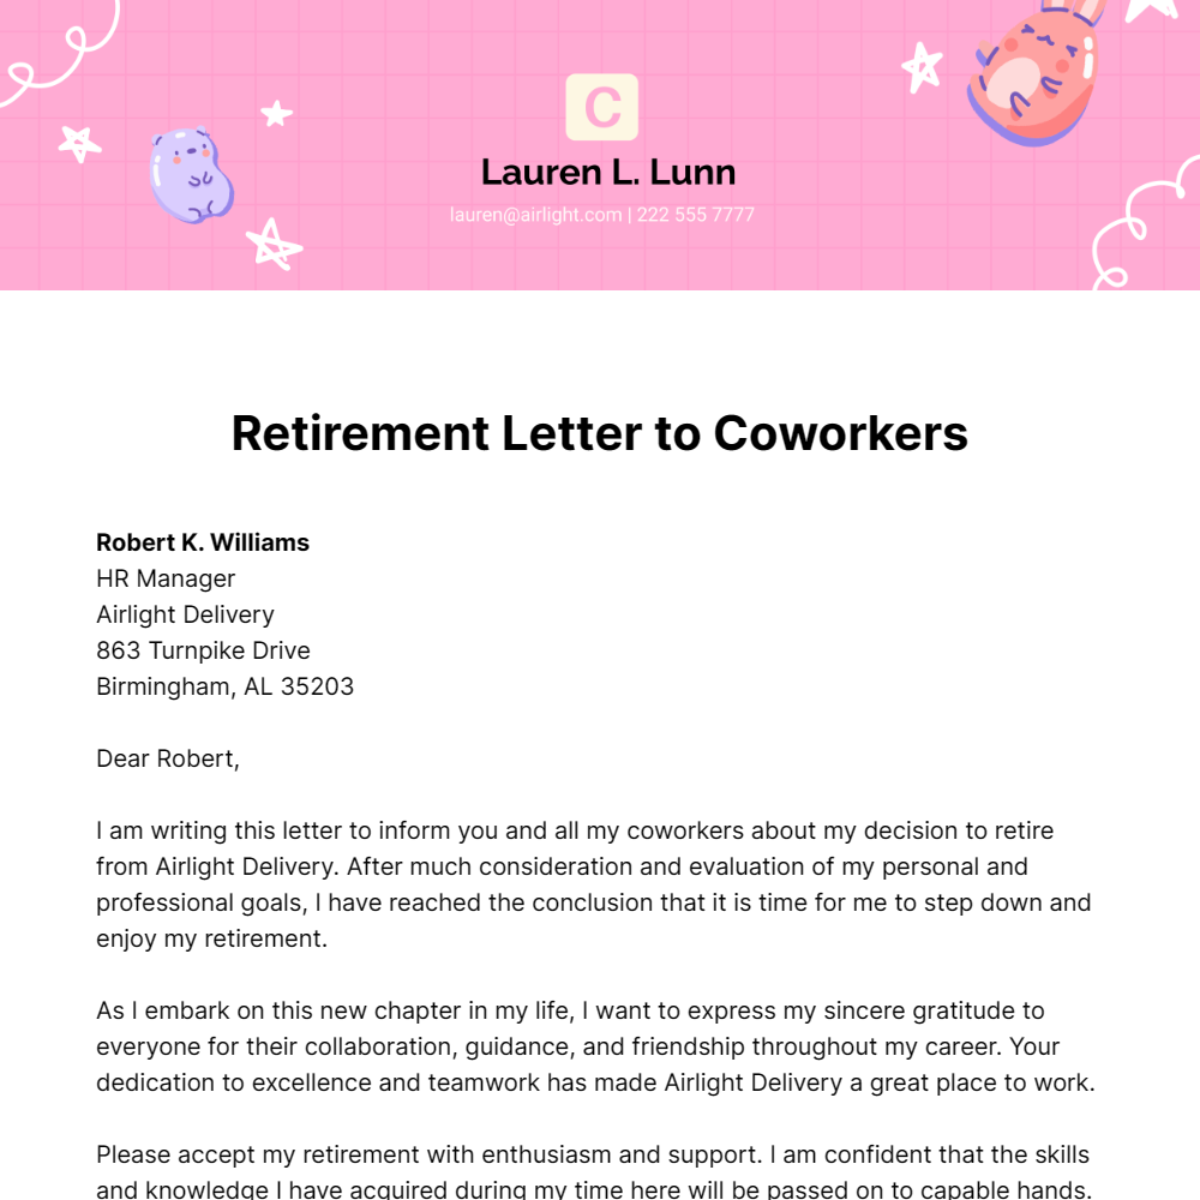 Retirement Letter to Coworkers Template